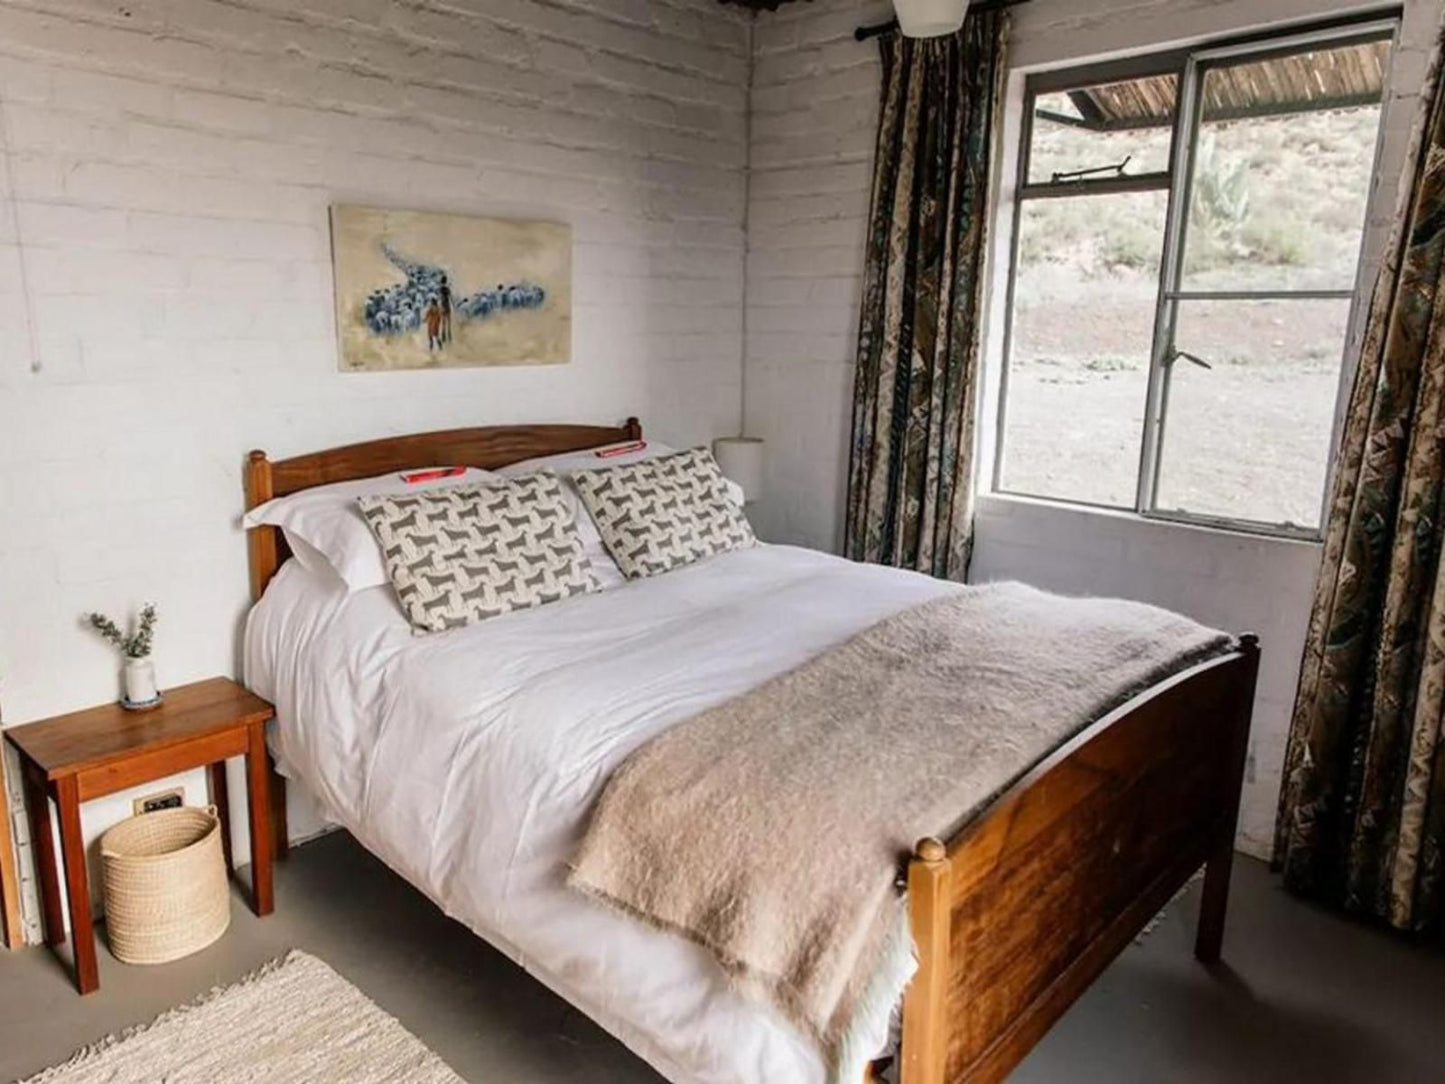 Higher Karoo Loxton Northern Cape South Africa Bedroom